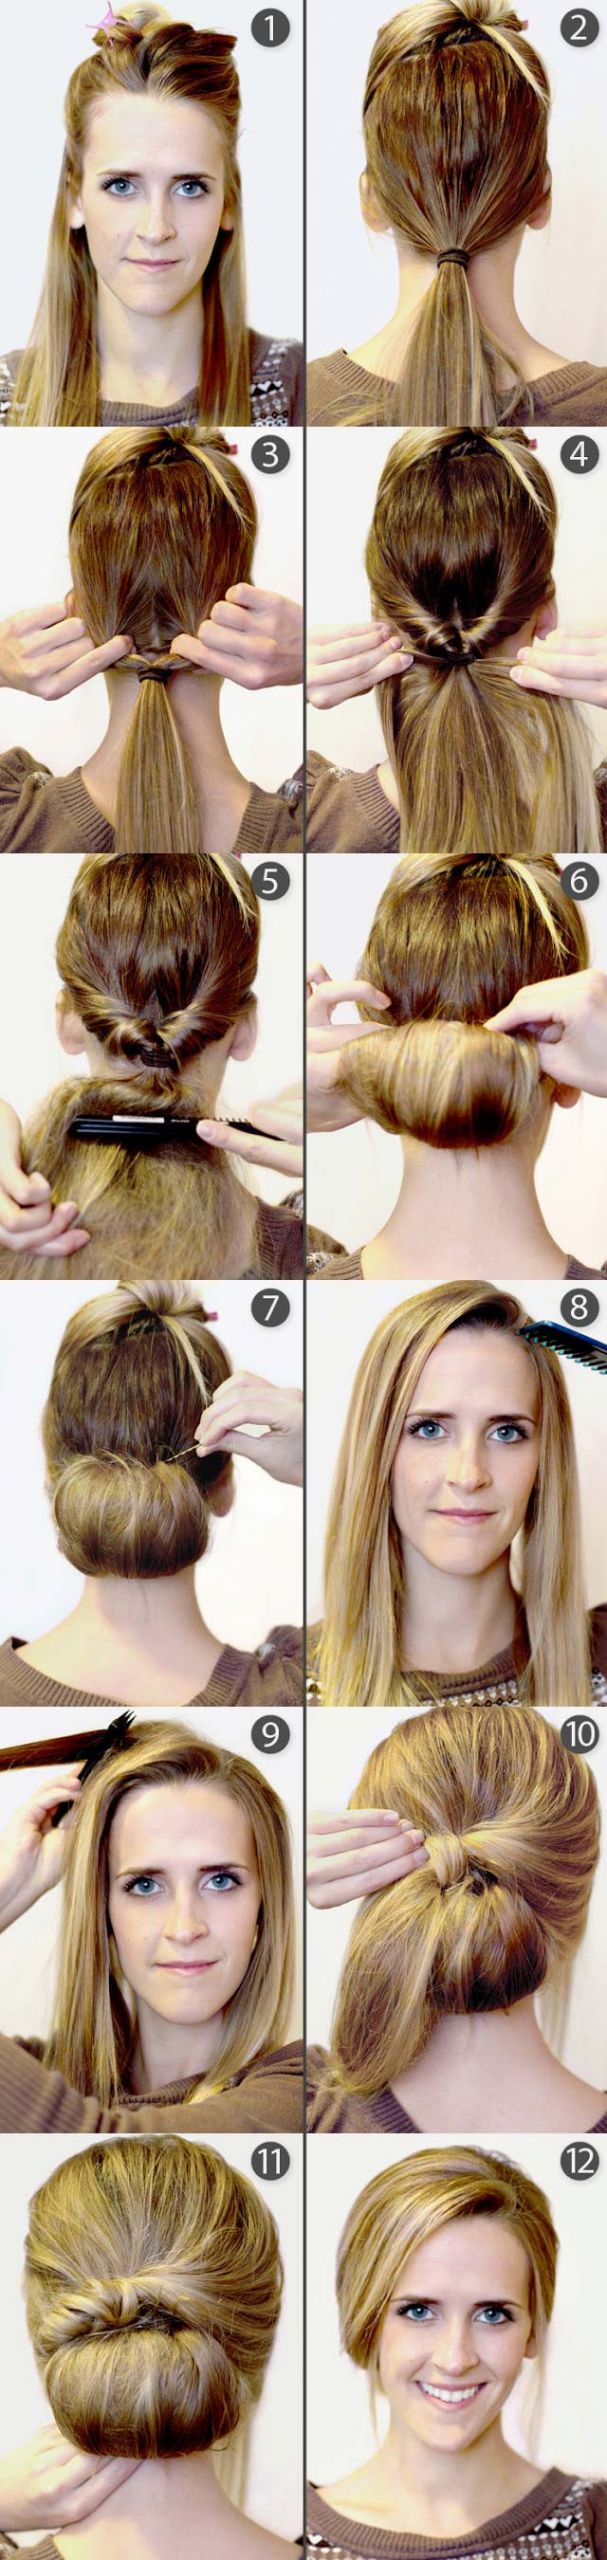 DIY Haircuts For Long Hair
 DIY Your Step by Step for the Best Cute Hairstyles